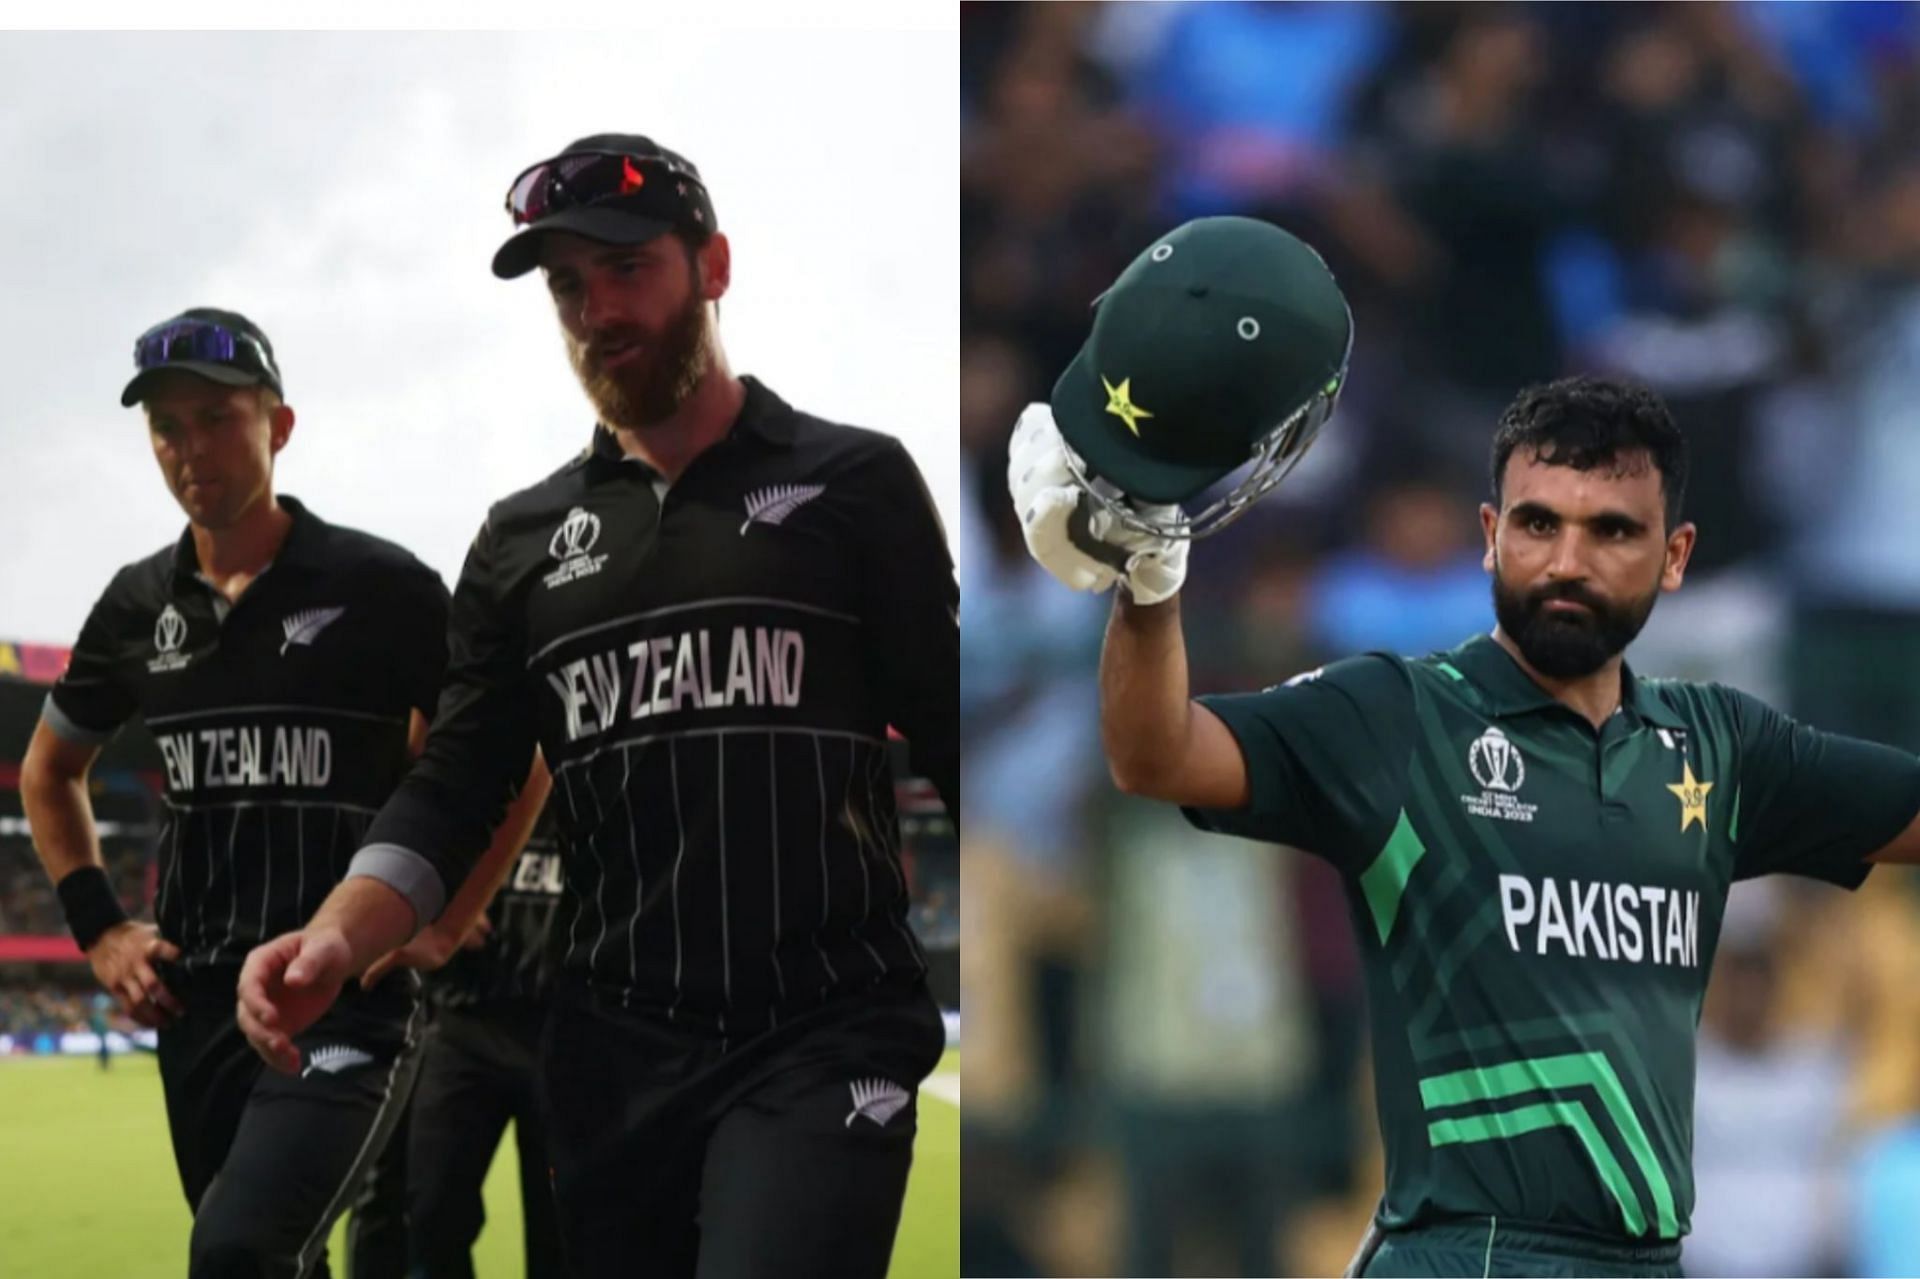 New Zealand lost against Pakistan despite scoring 401 [Getty Images]